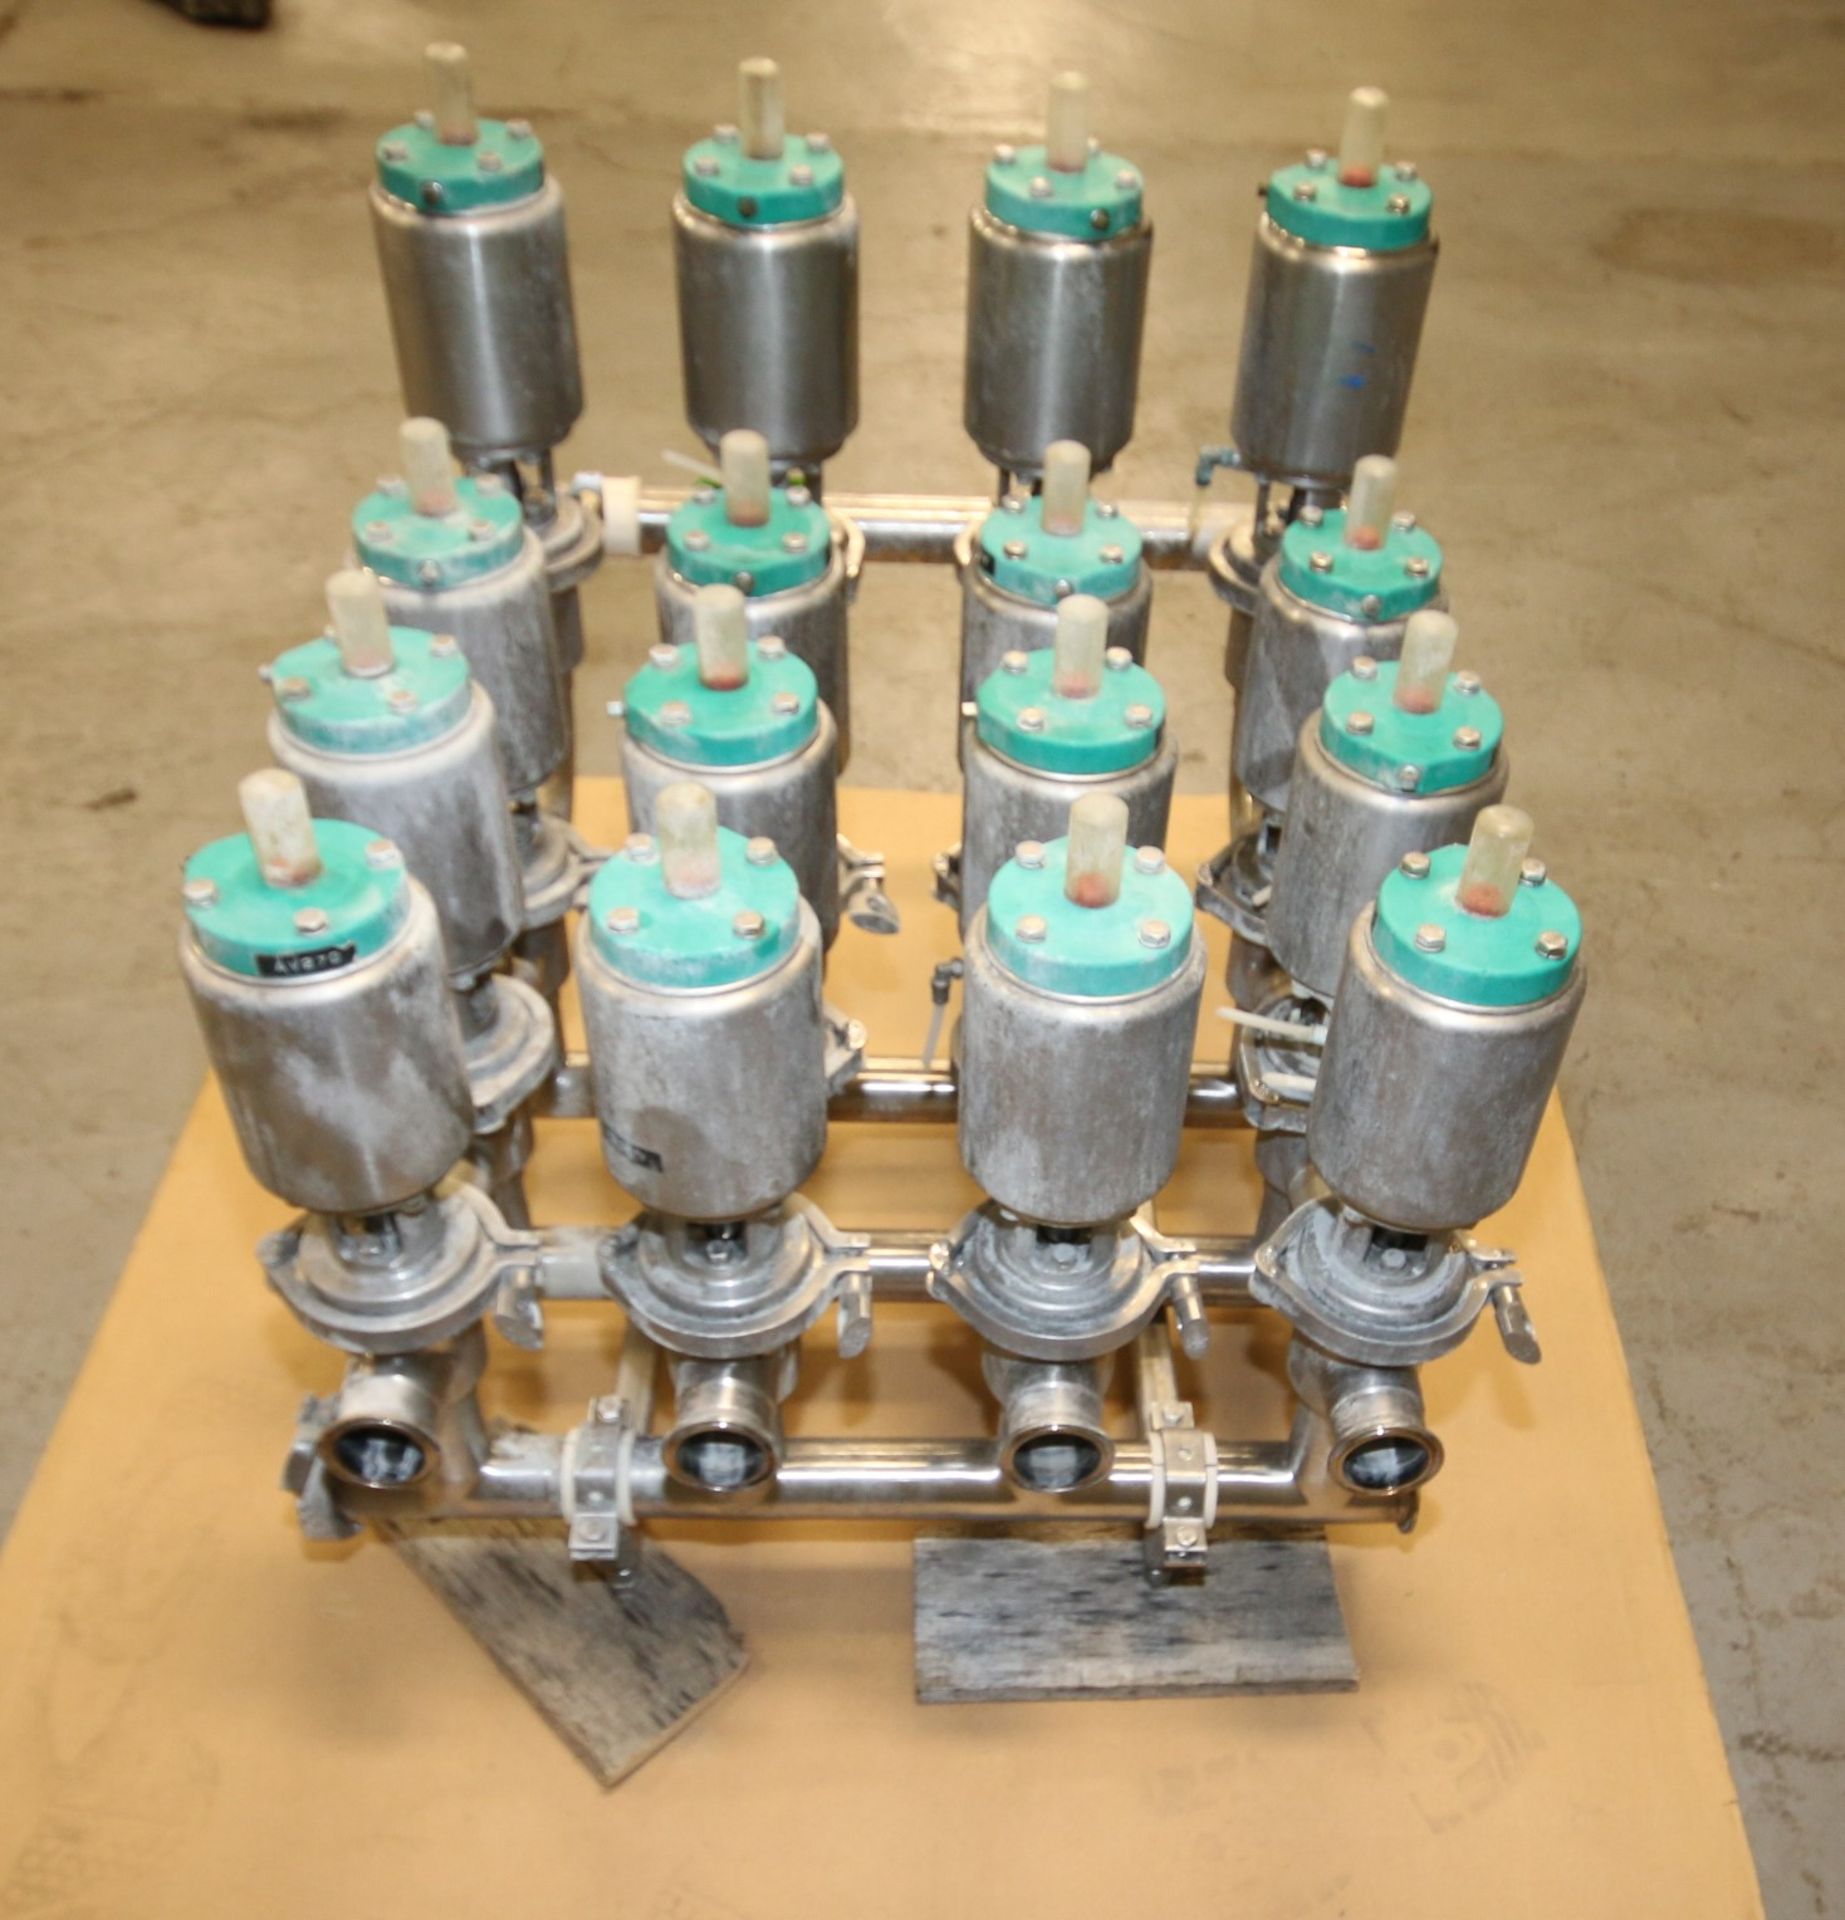 16-Valve Tri-Clover 2" S/S Air Valve Manifold / Cluster, with Model 761 Valves - Image 3 of 4